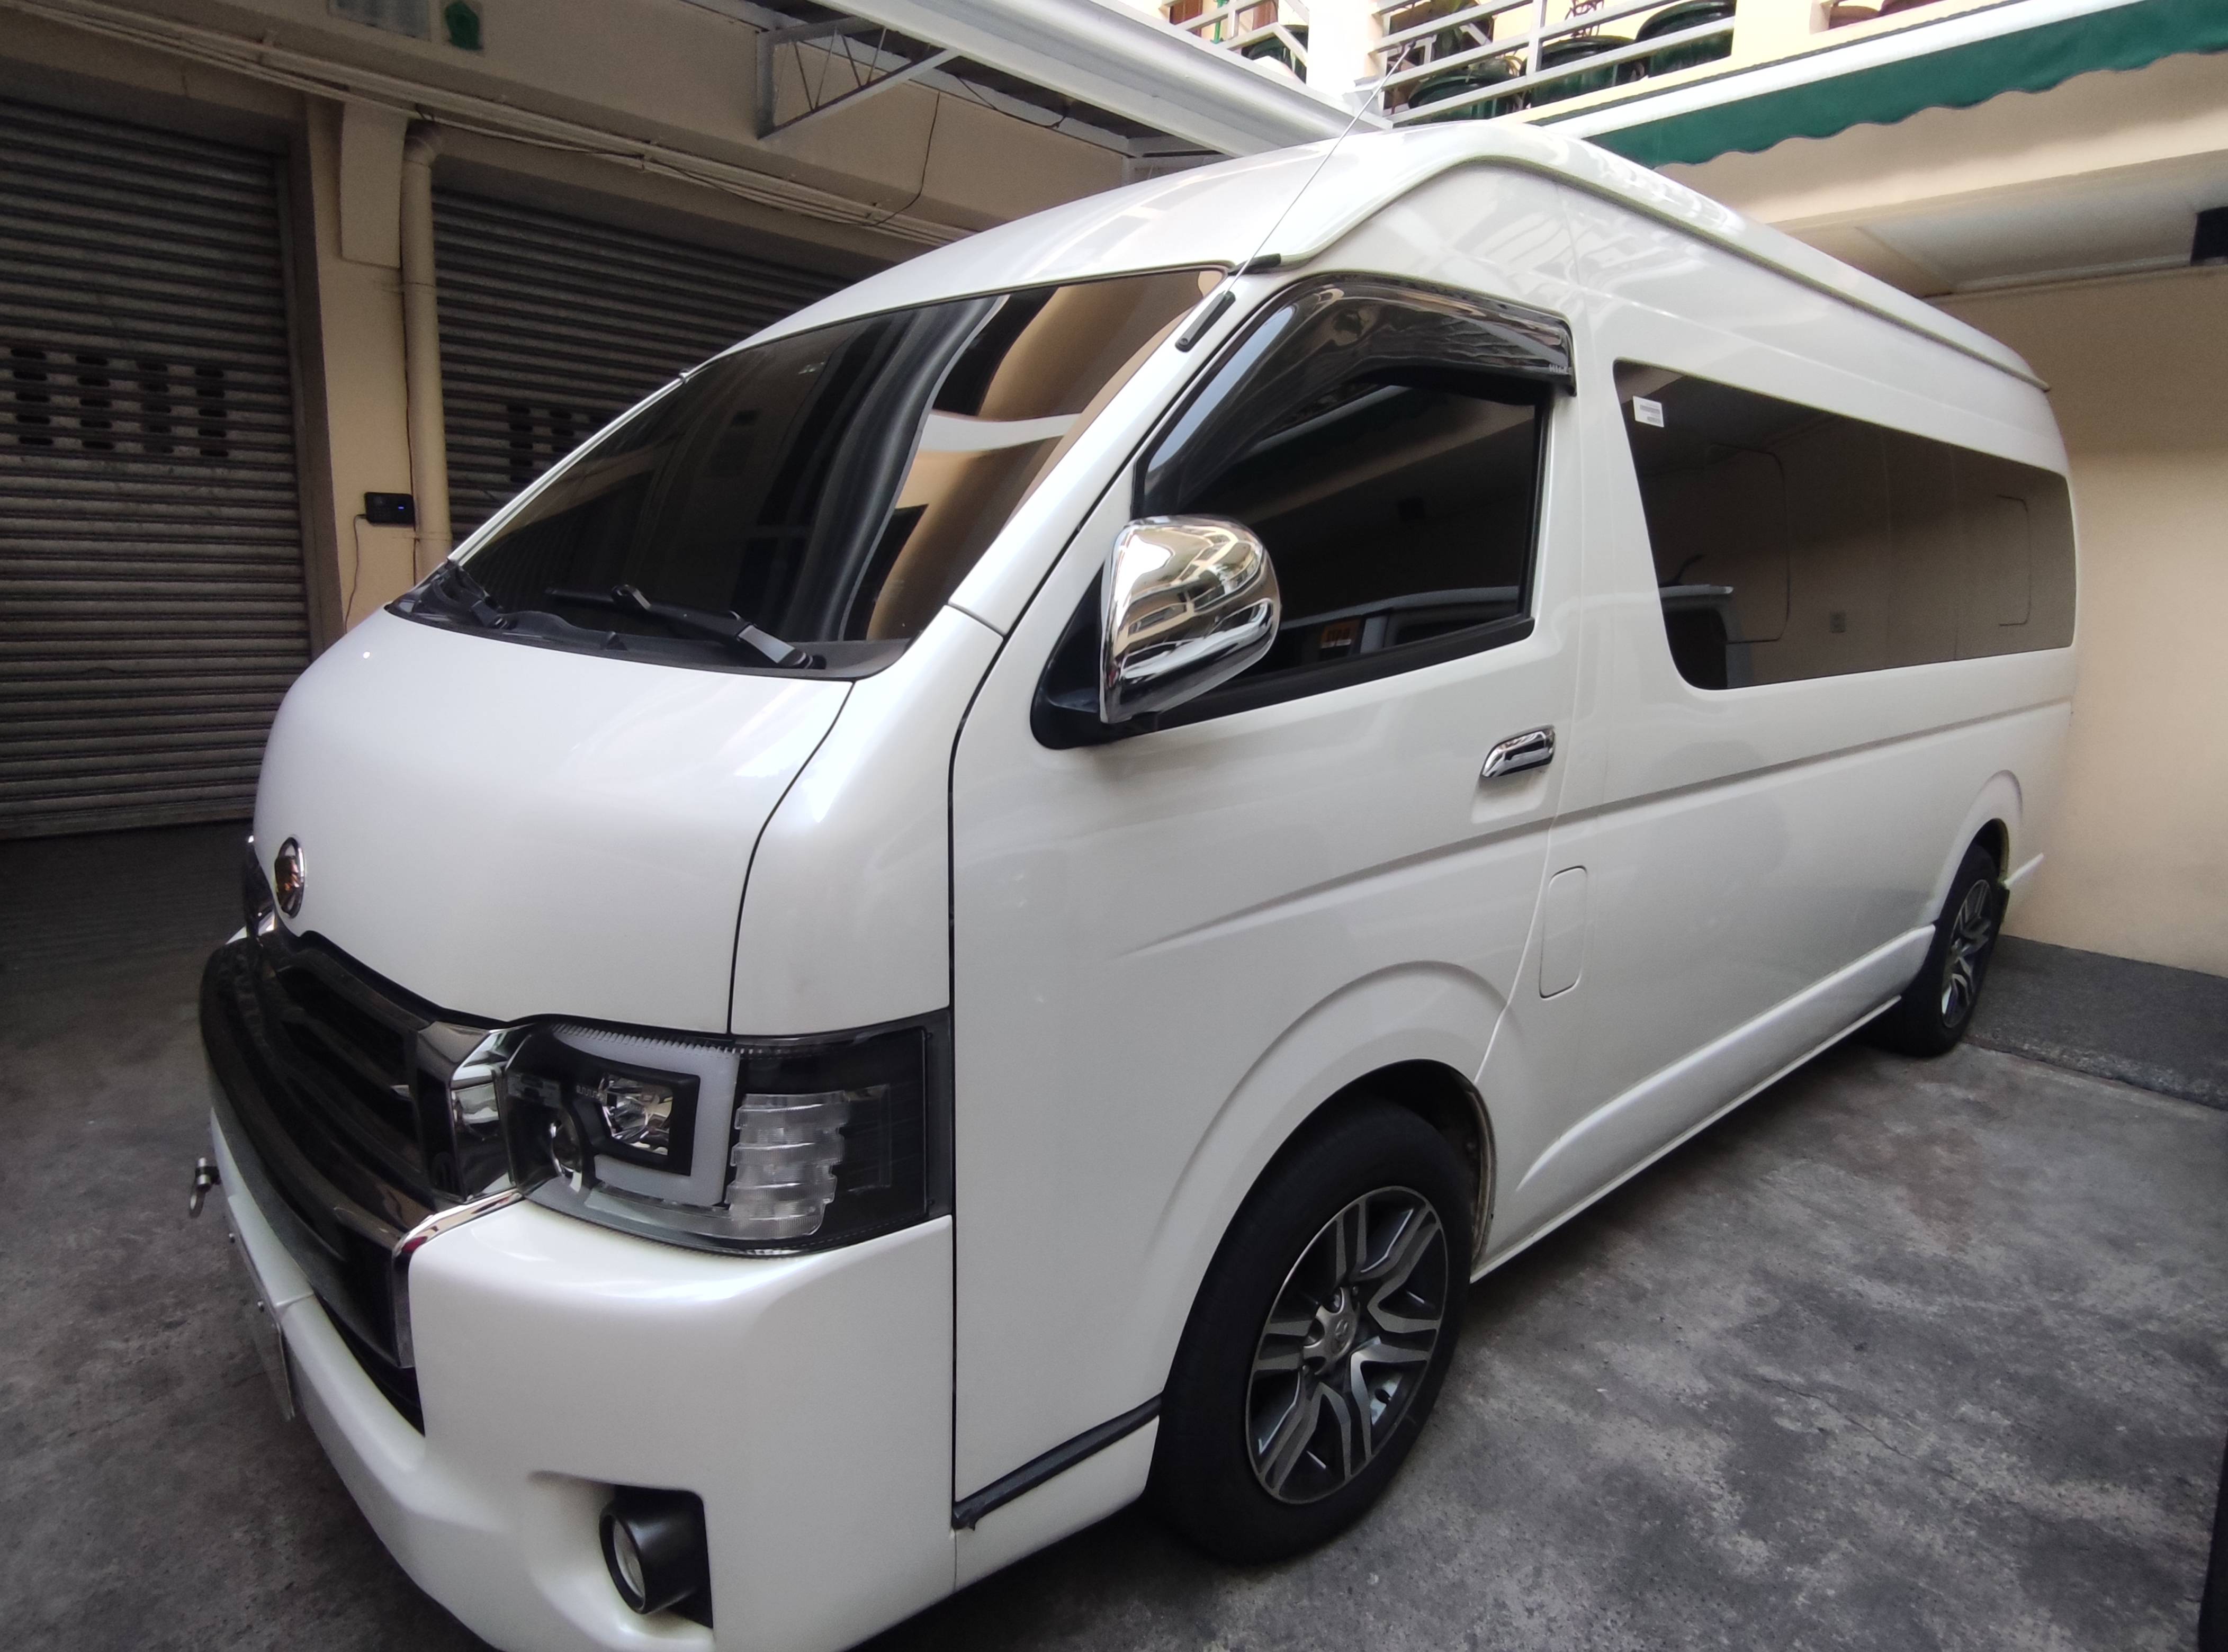 Used 2017 Toyota Hiace 3.0 LXV AT